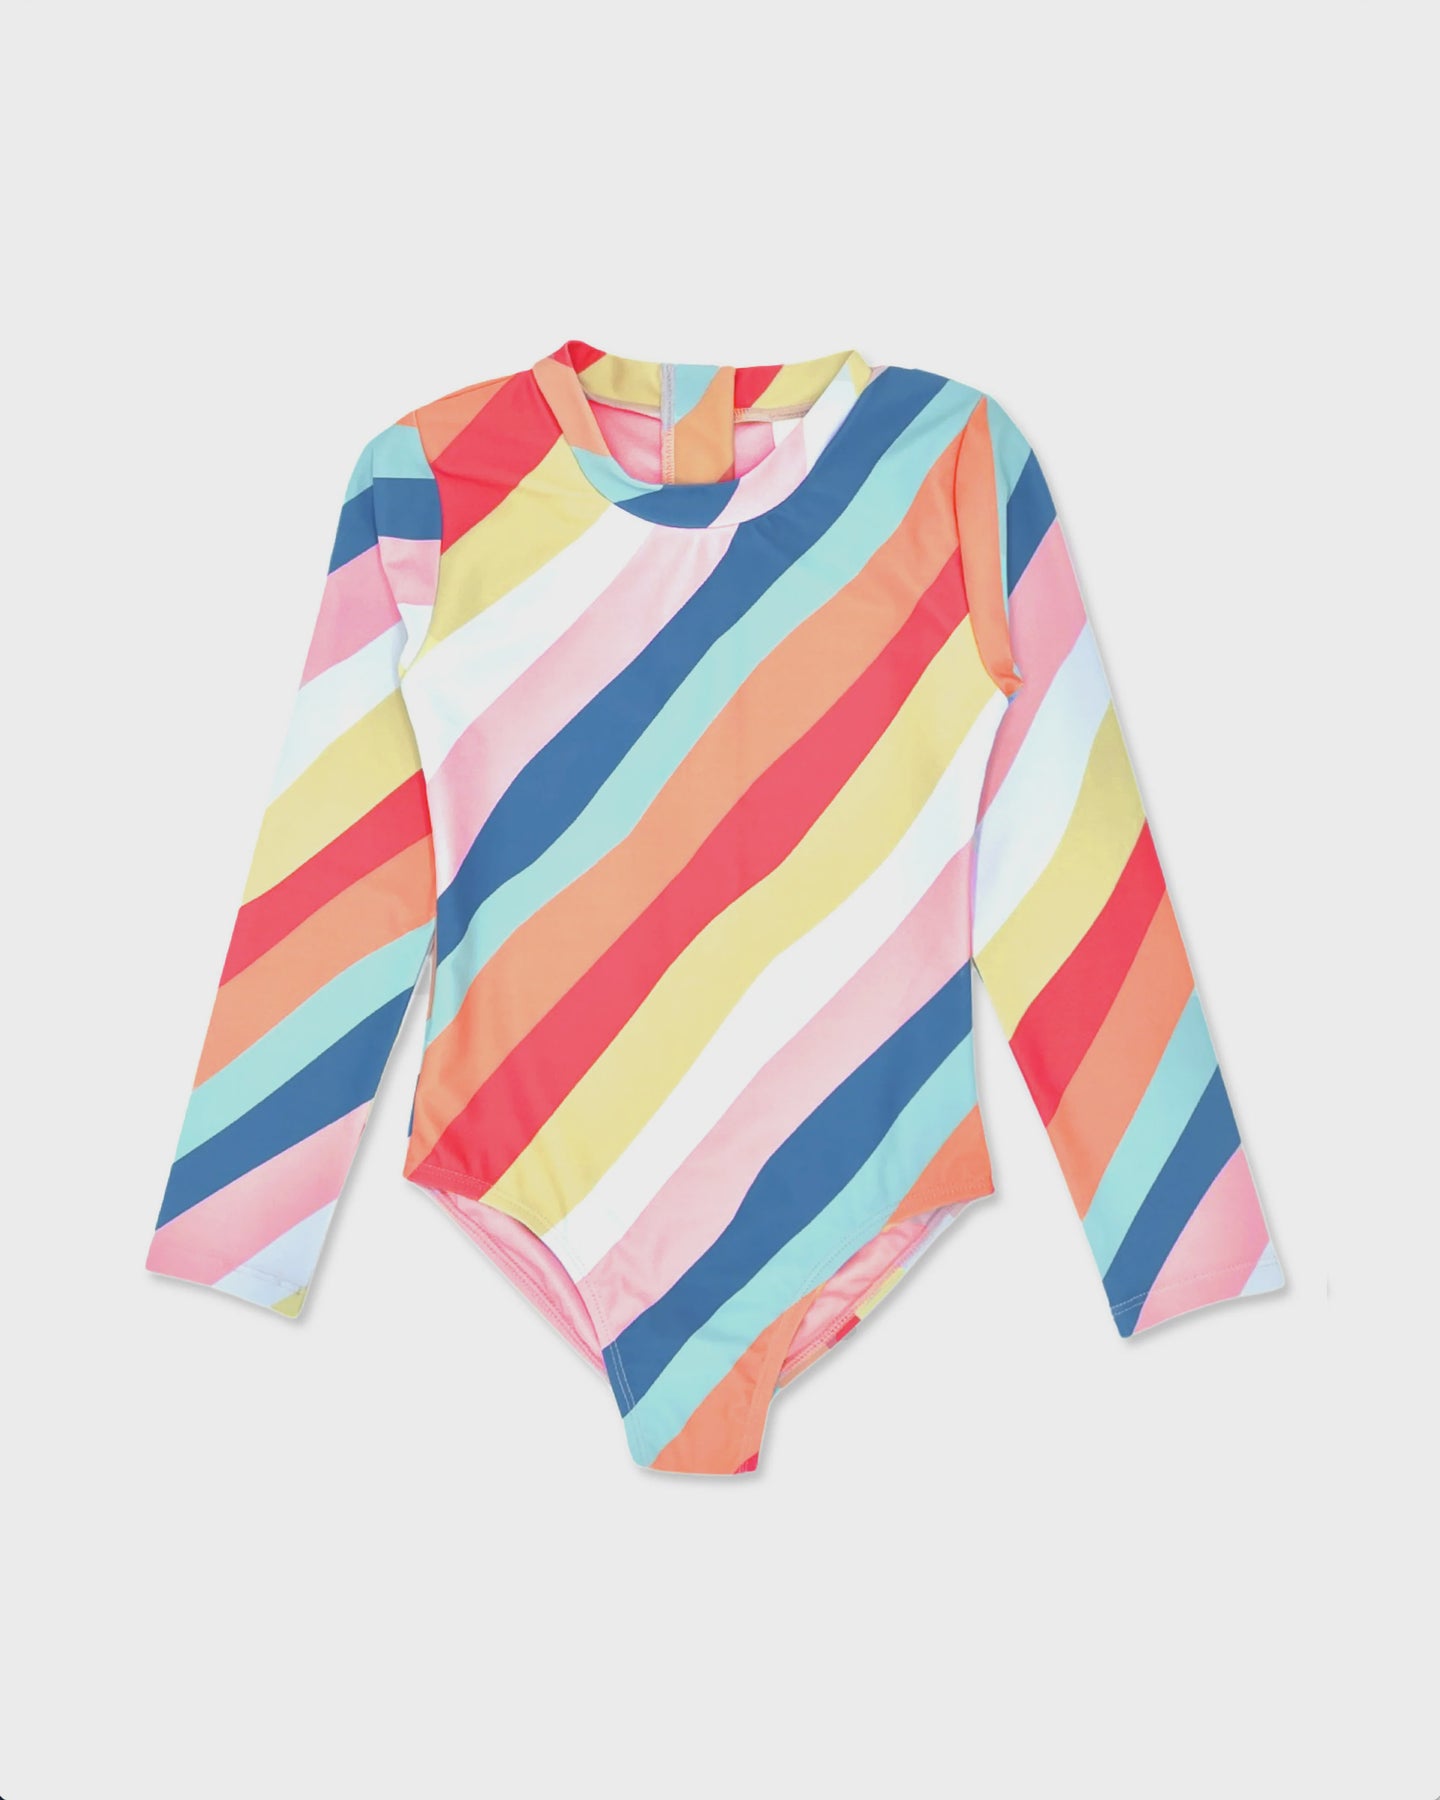 Feather 4 Arrow - Wave Chaser Baby Surf Suit - East Cape Stripe